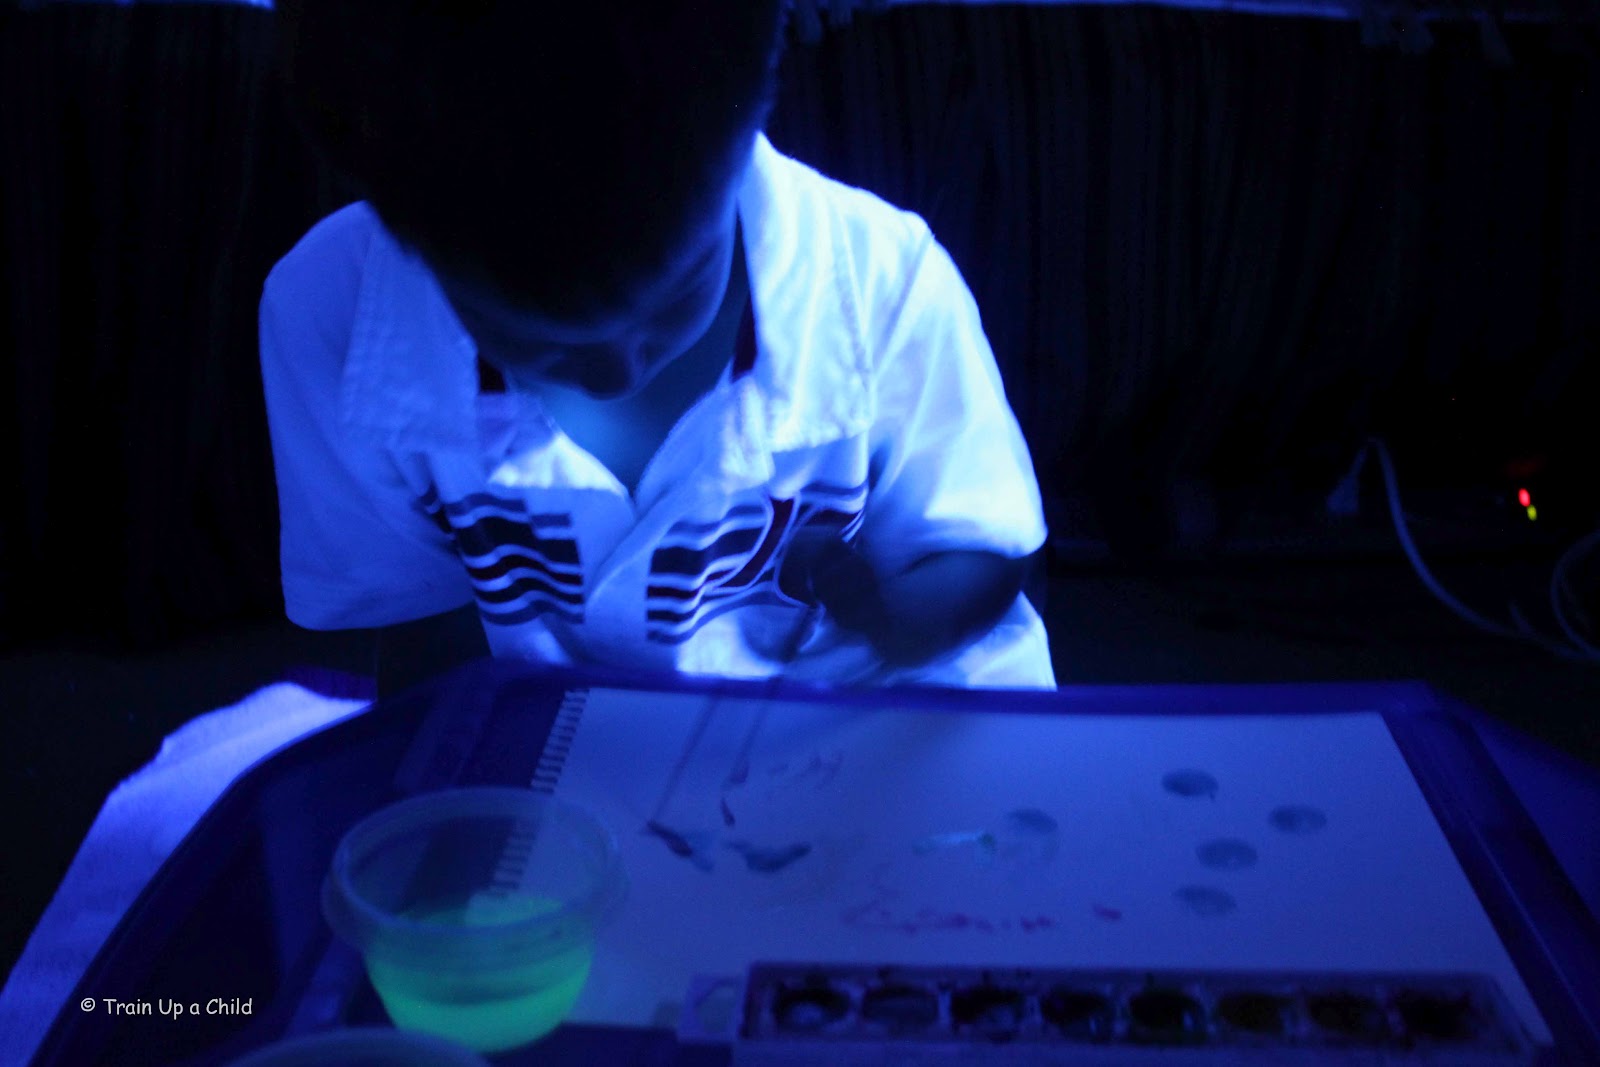 How to Make Glow-in-the-Dark Paint at Home